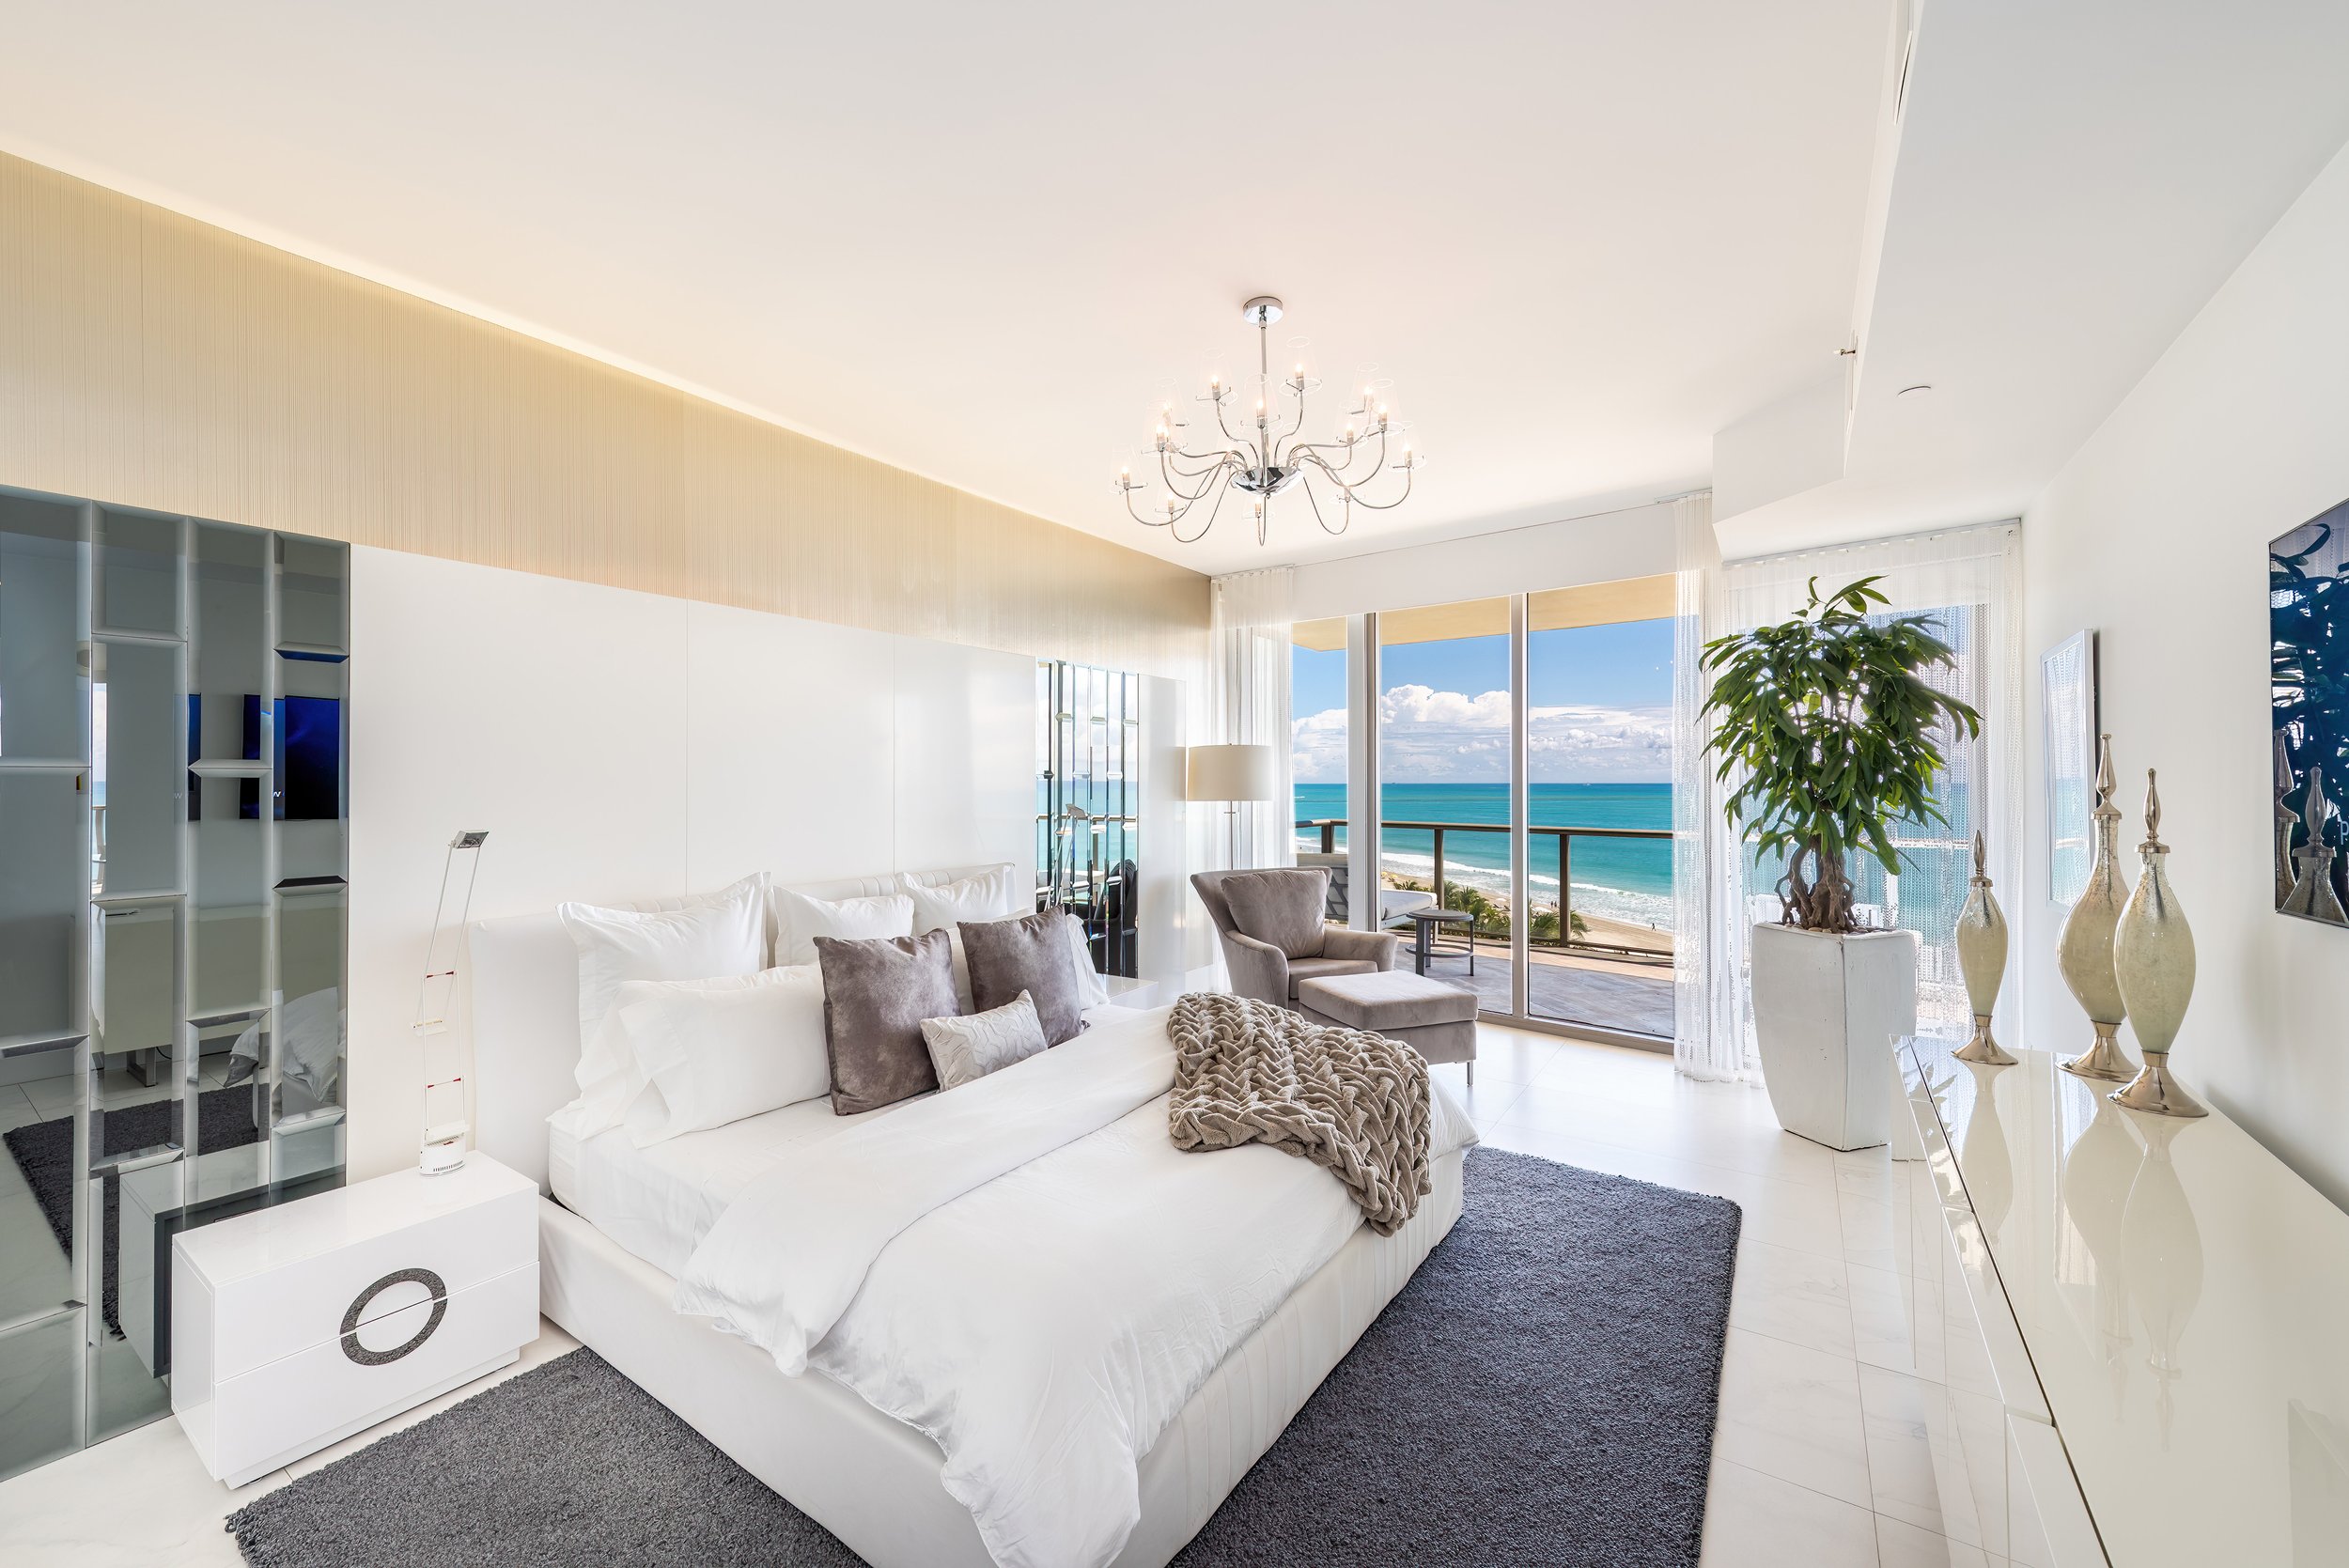 Master Brokers Forum Listing: See The Views From This Beachfront Condo In St. Regis Bal Harbour Asking $10.995 Million 18.JPG